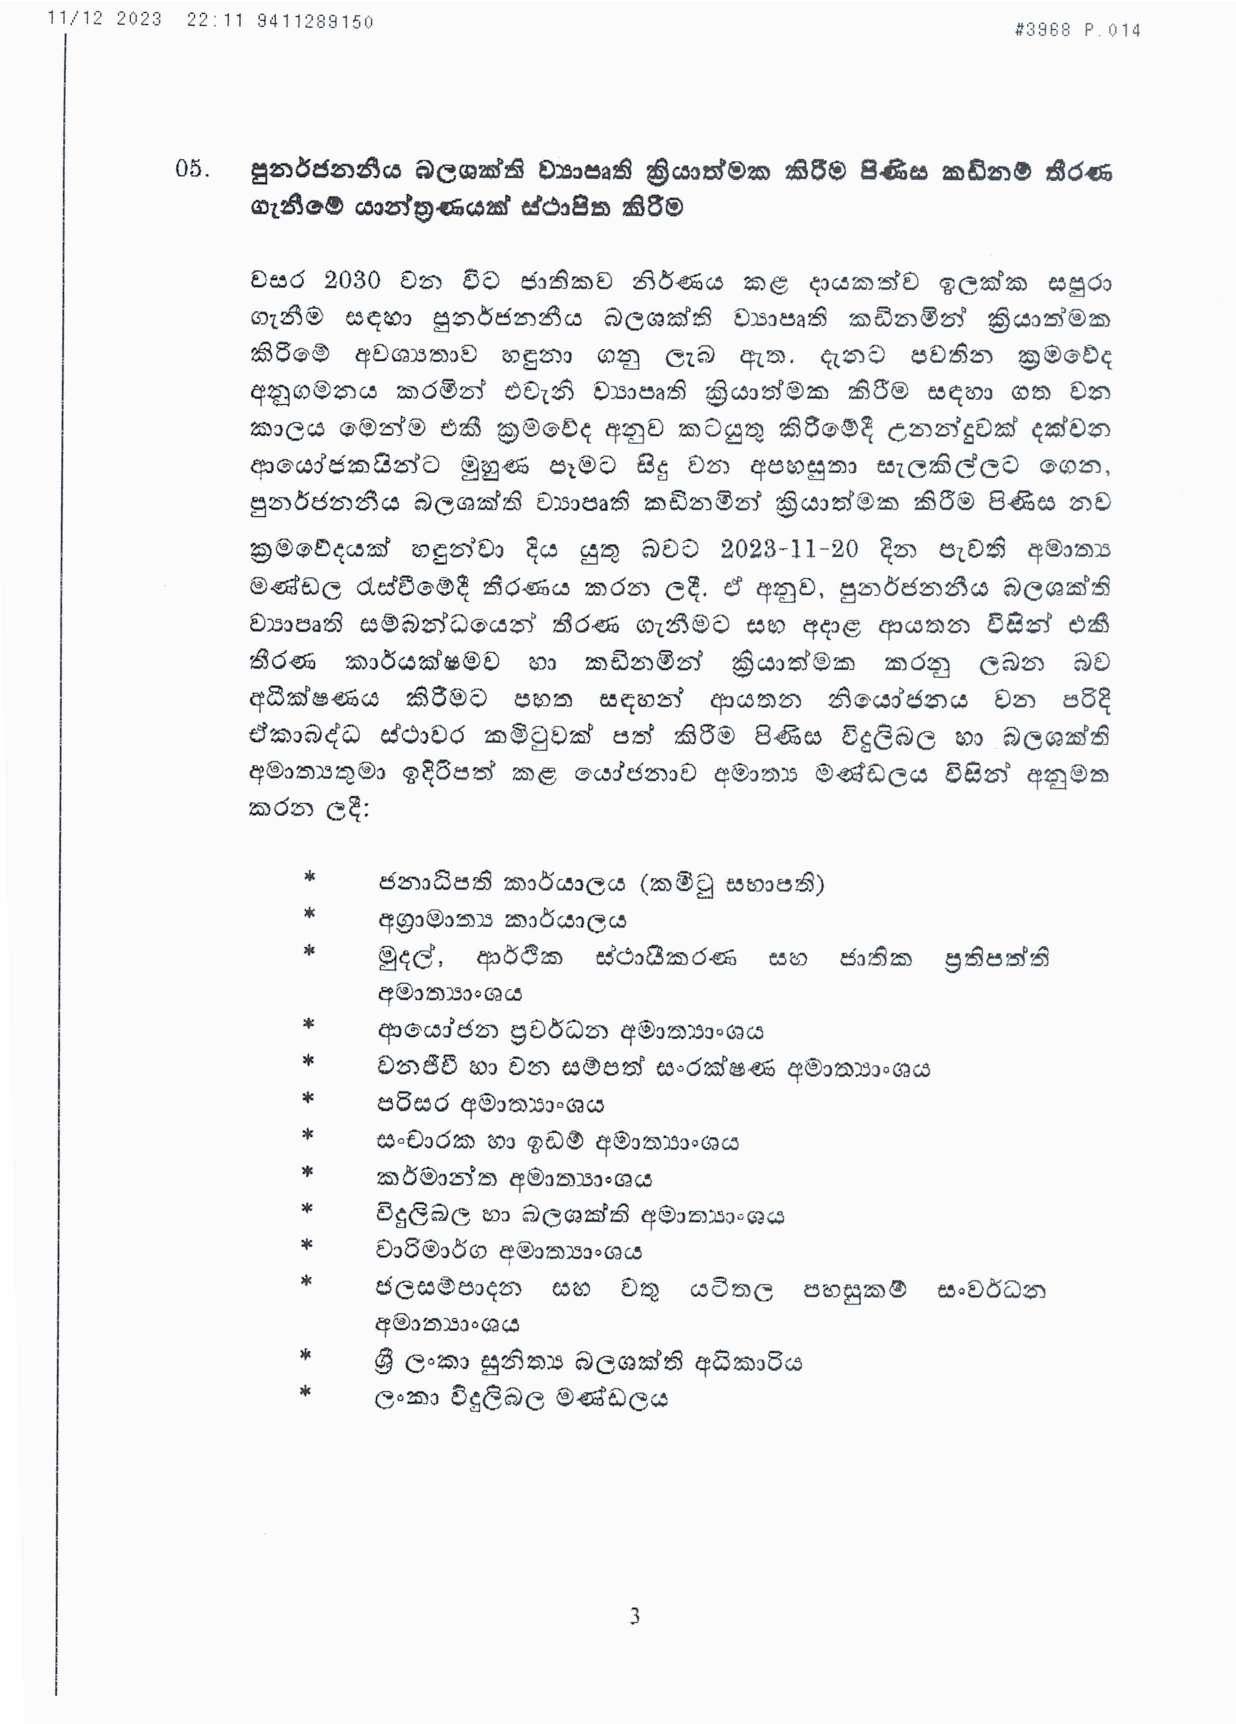 Cabinet Decisions on 11.12.2023 page 003